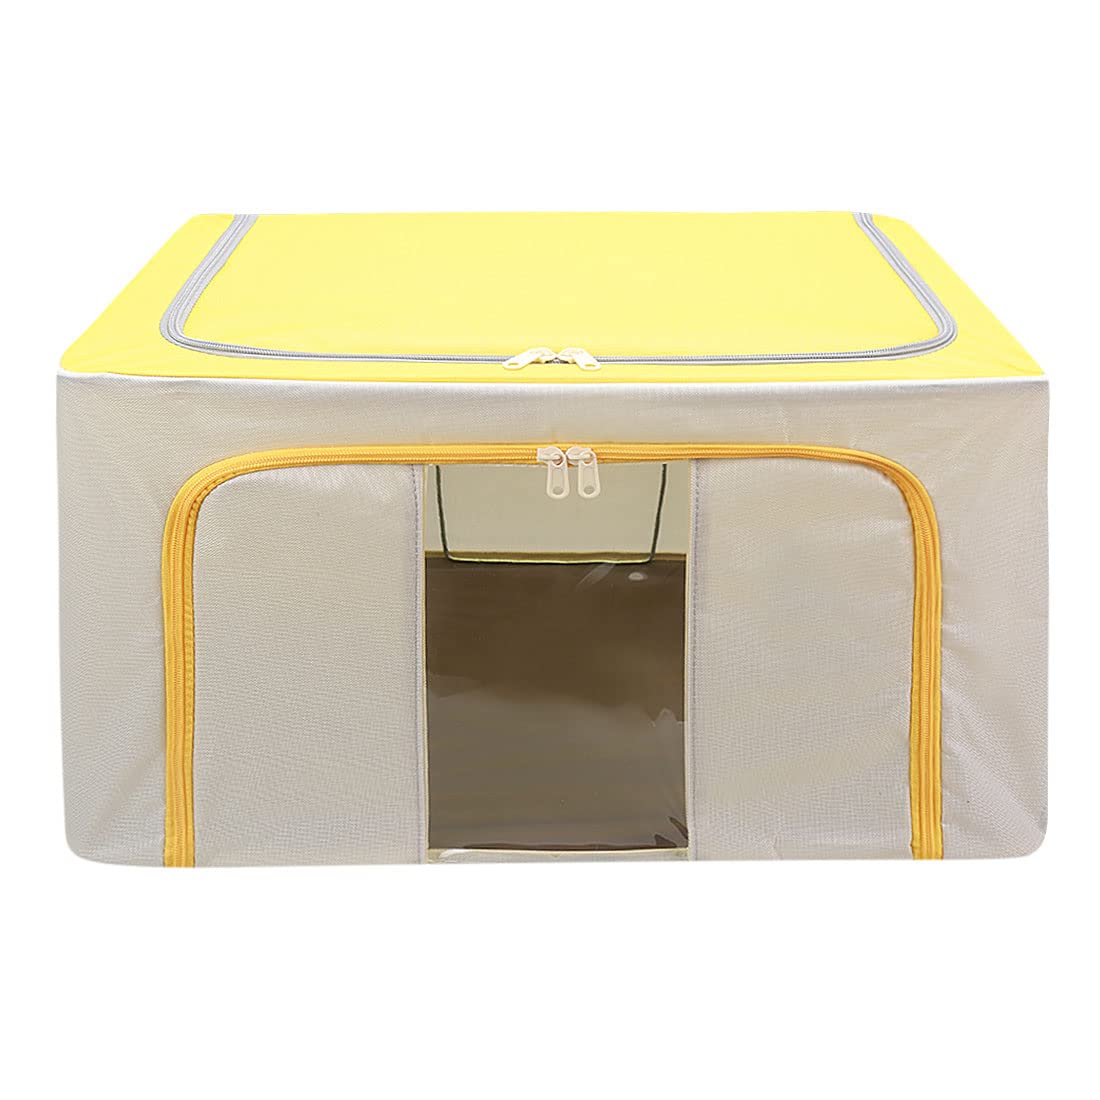 MINISO Storage Boxes for Clothes,Organizer box with Reinforced Handle Thick Fabric for Comforters, Blankets,